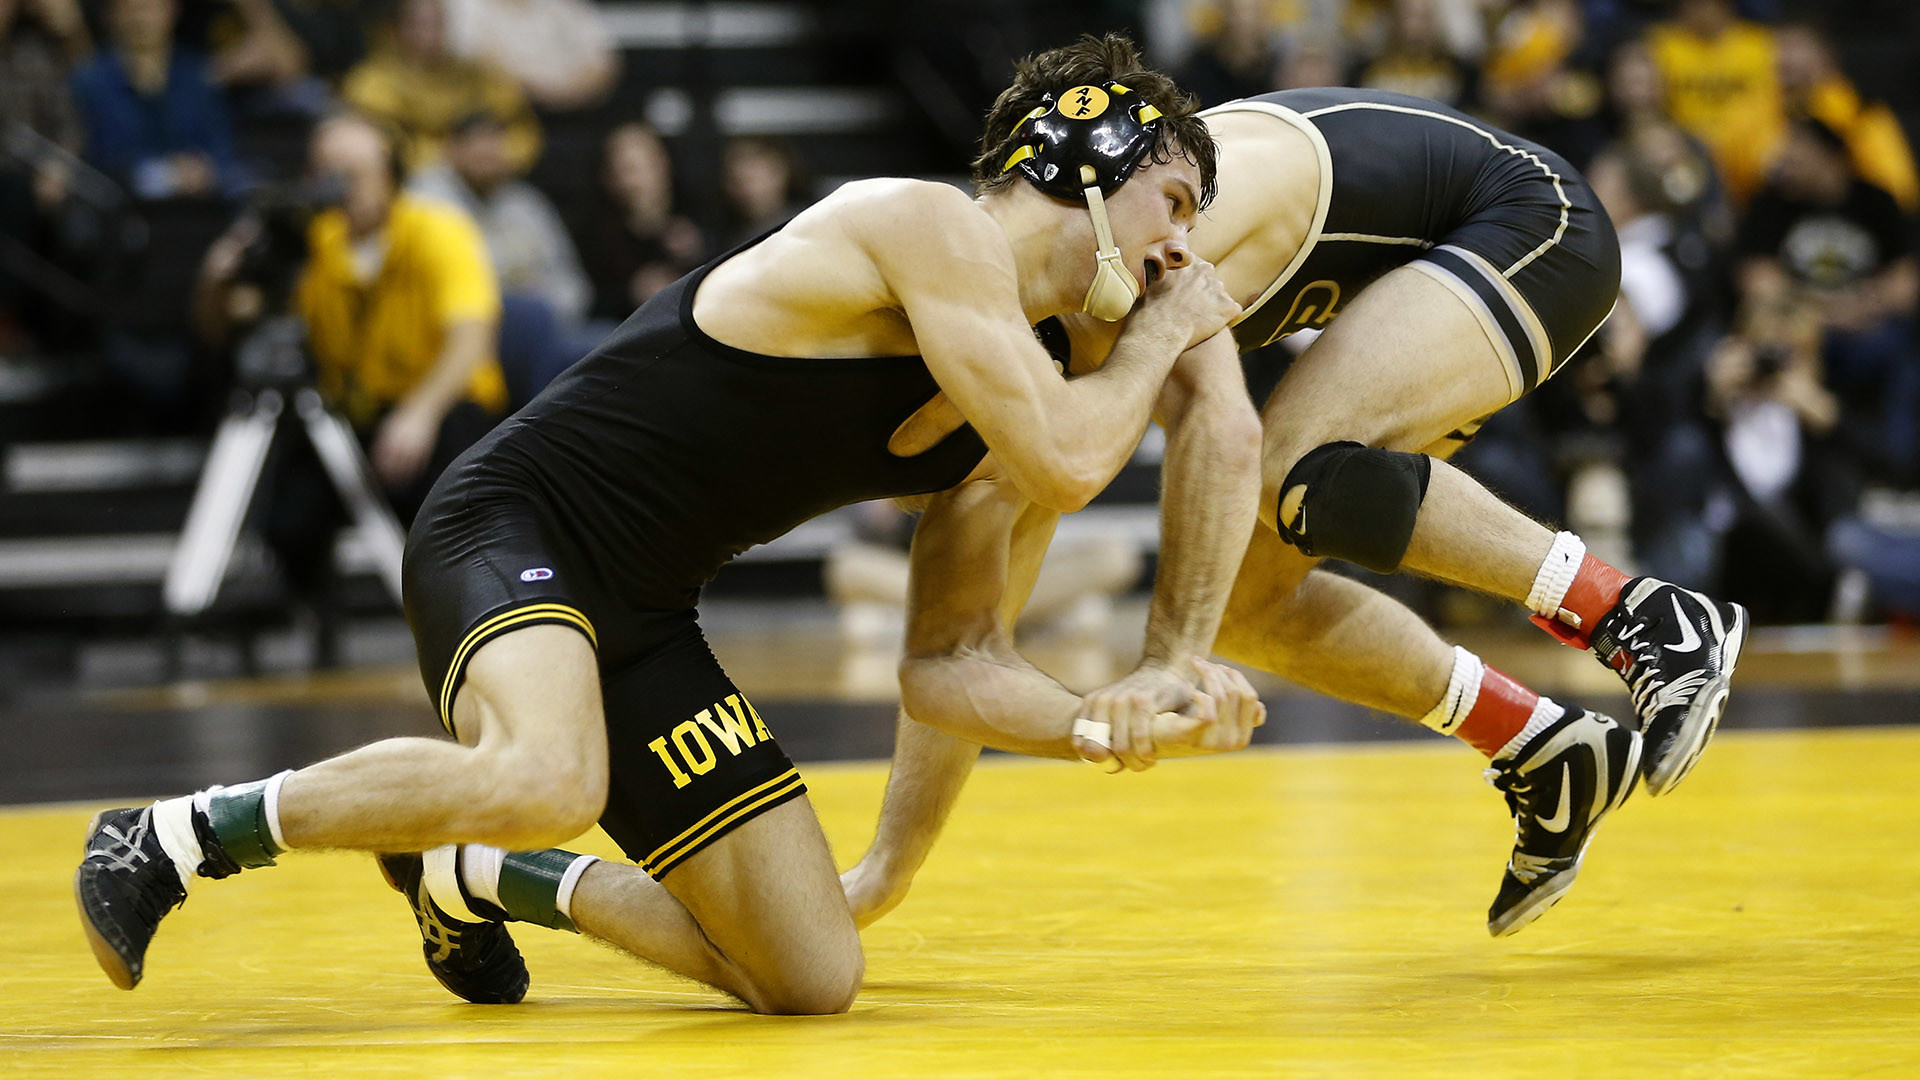 1920x1080 Iowa Dives in Against Division I Competition